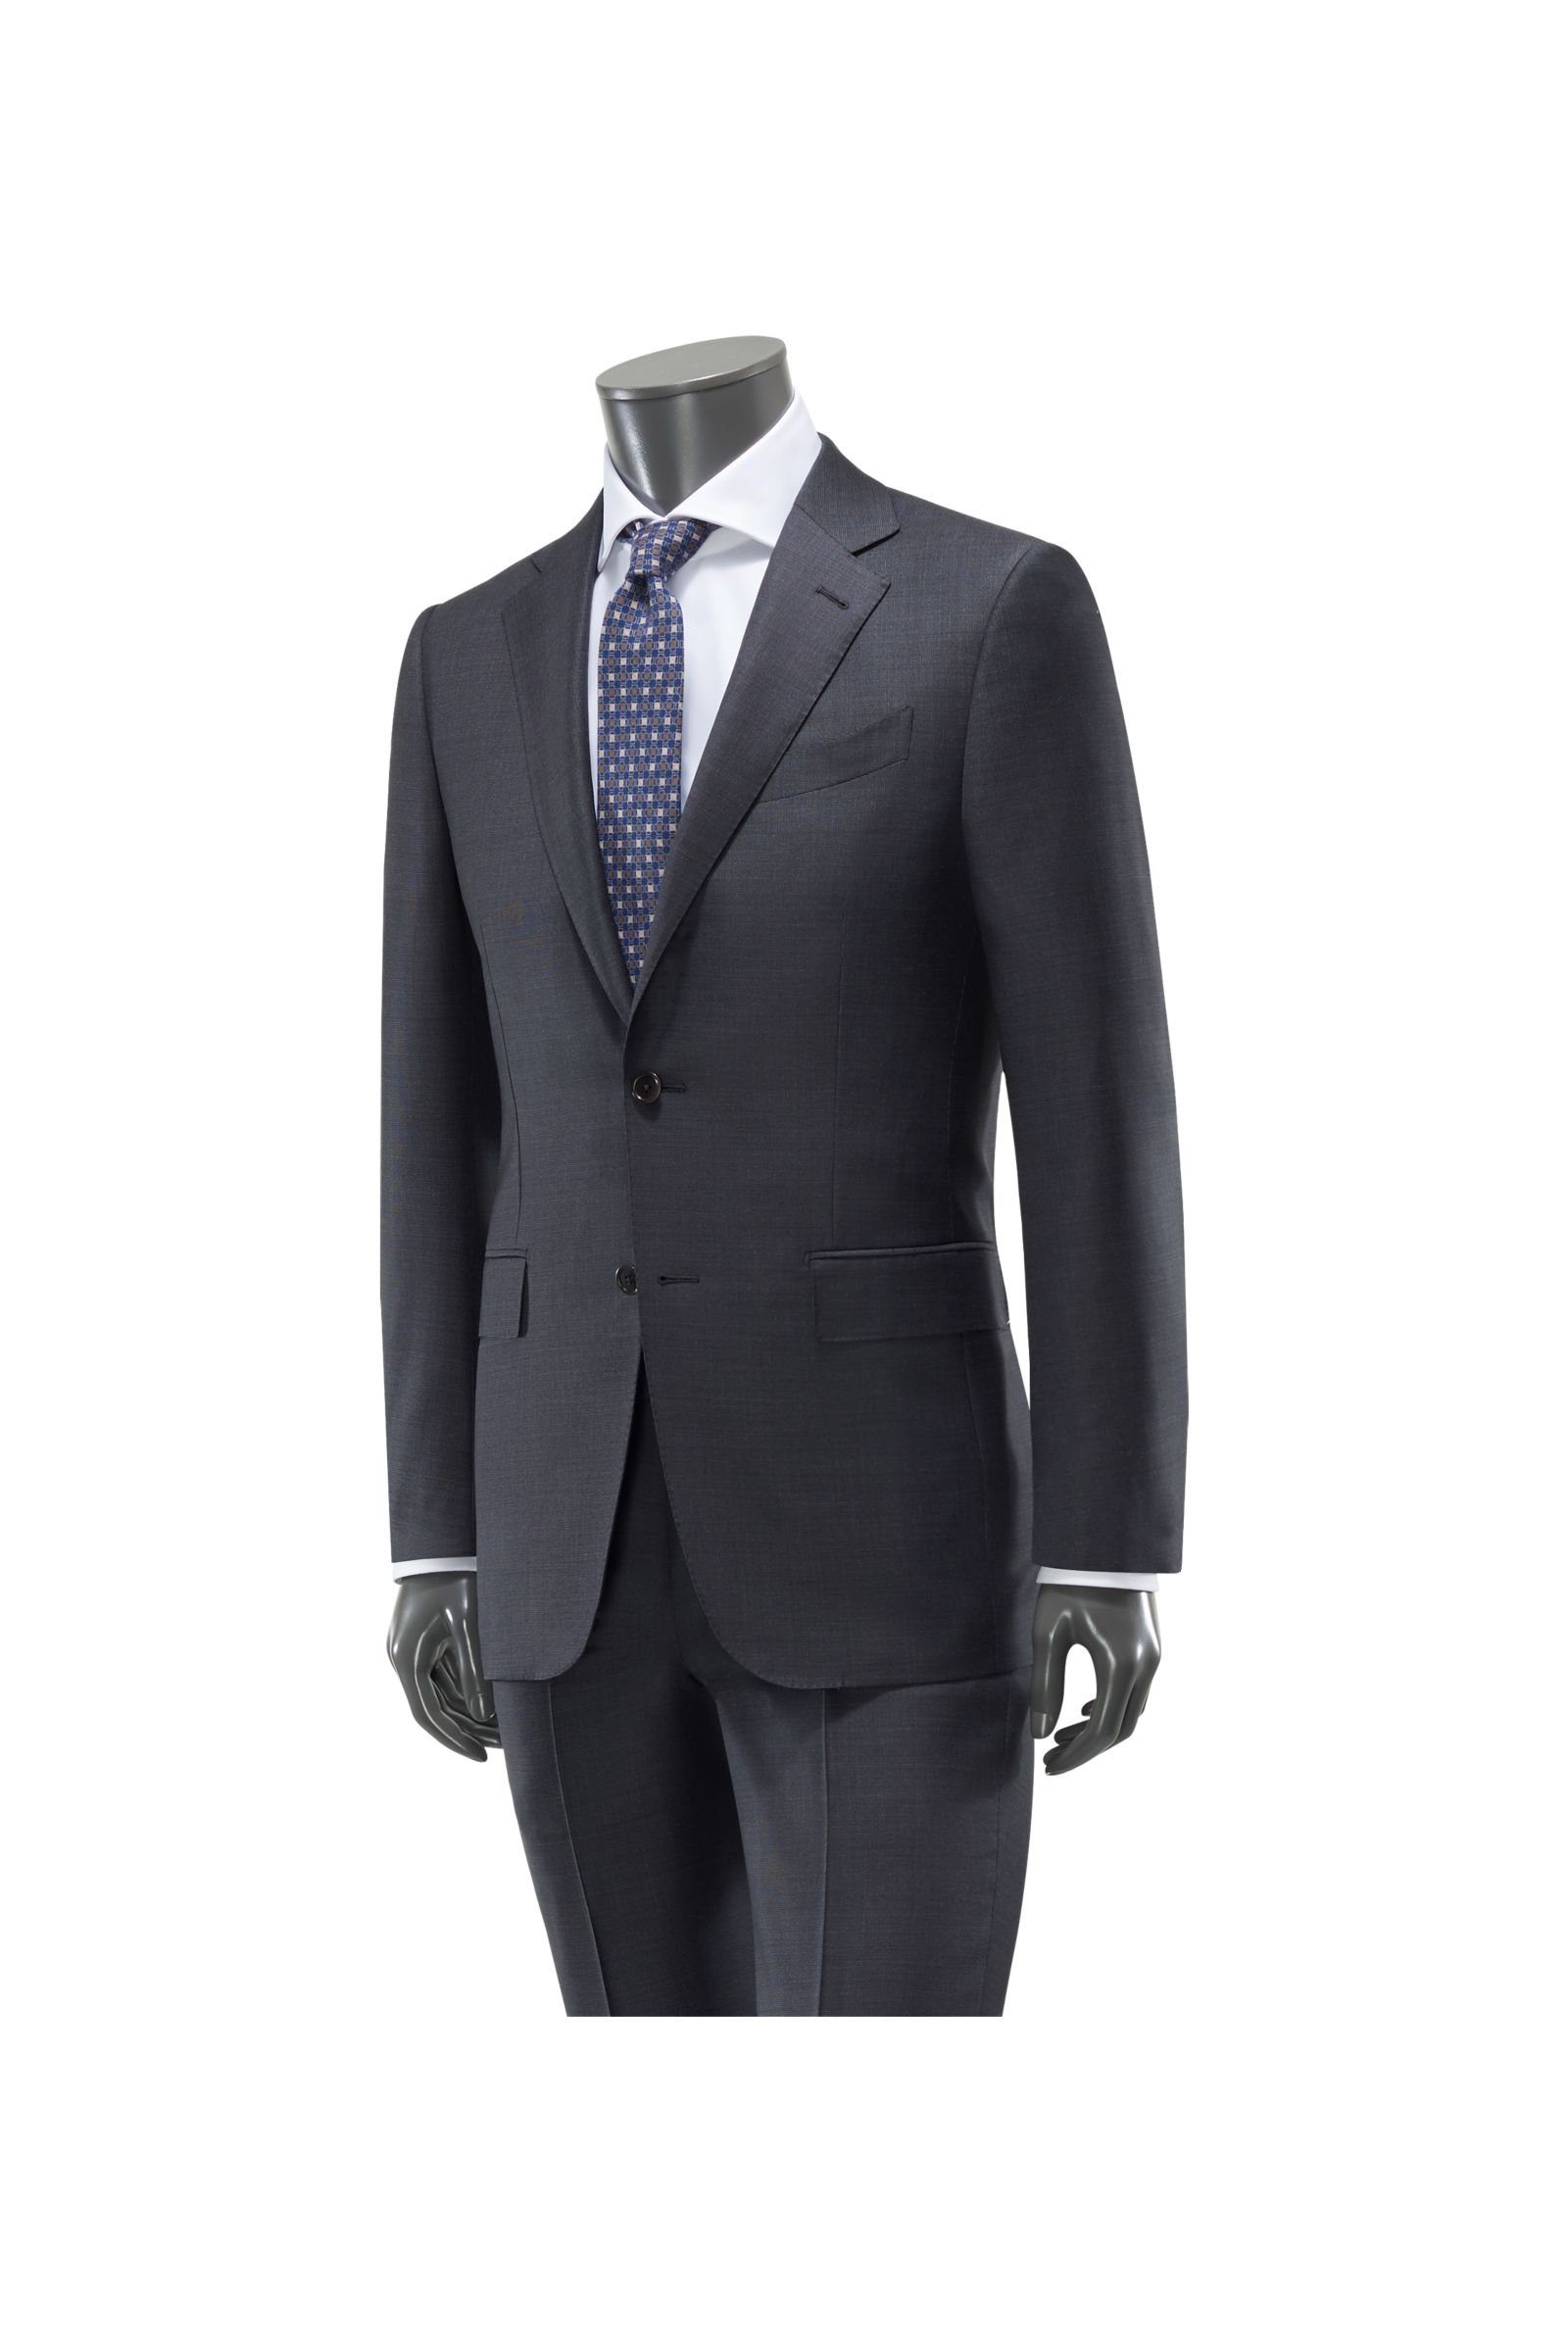 Suit 'Trofeo Milano Regular Fit' anthracite patterned